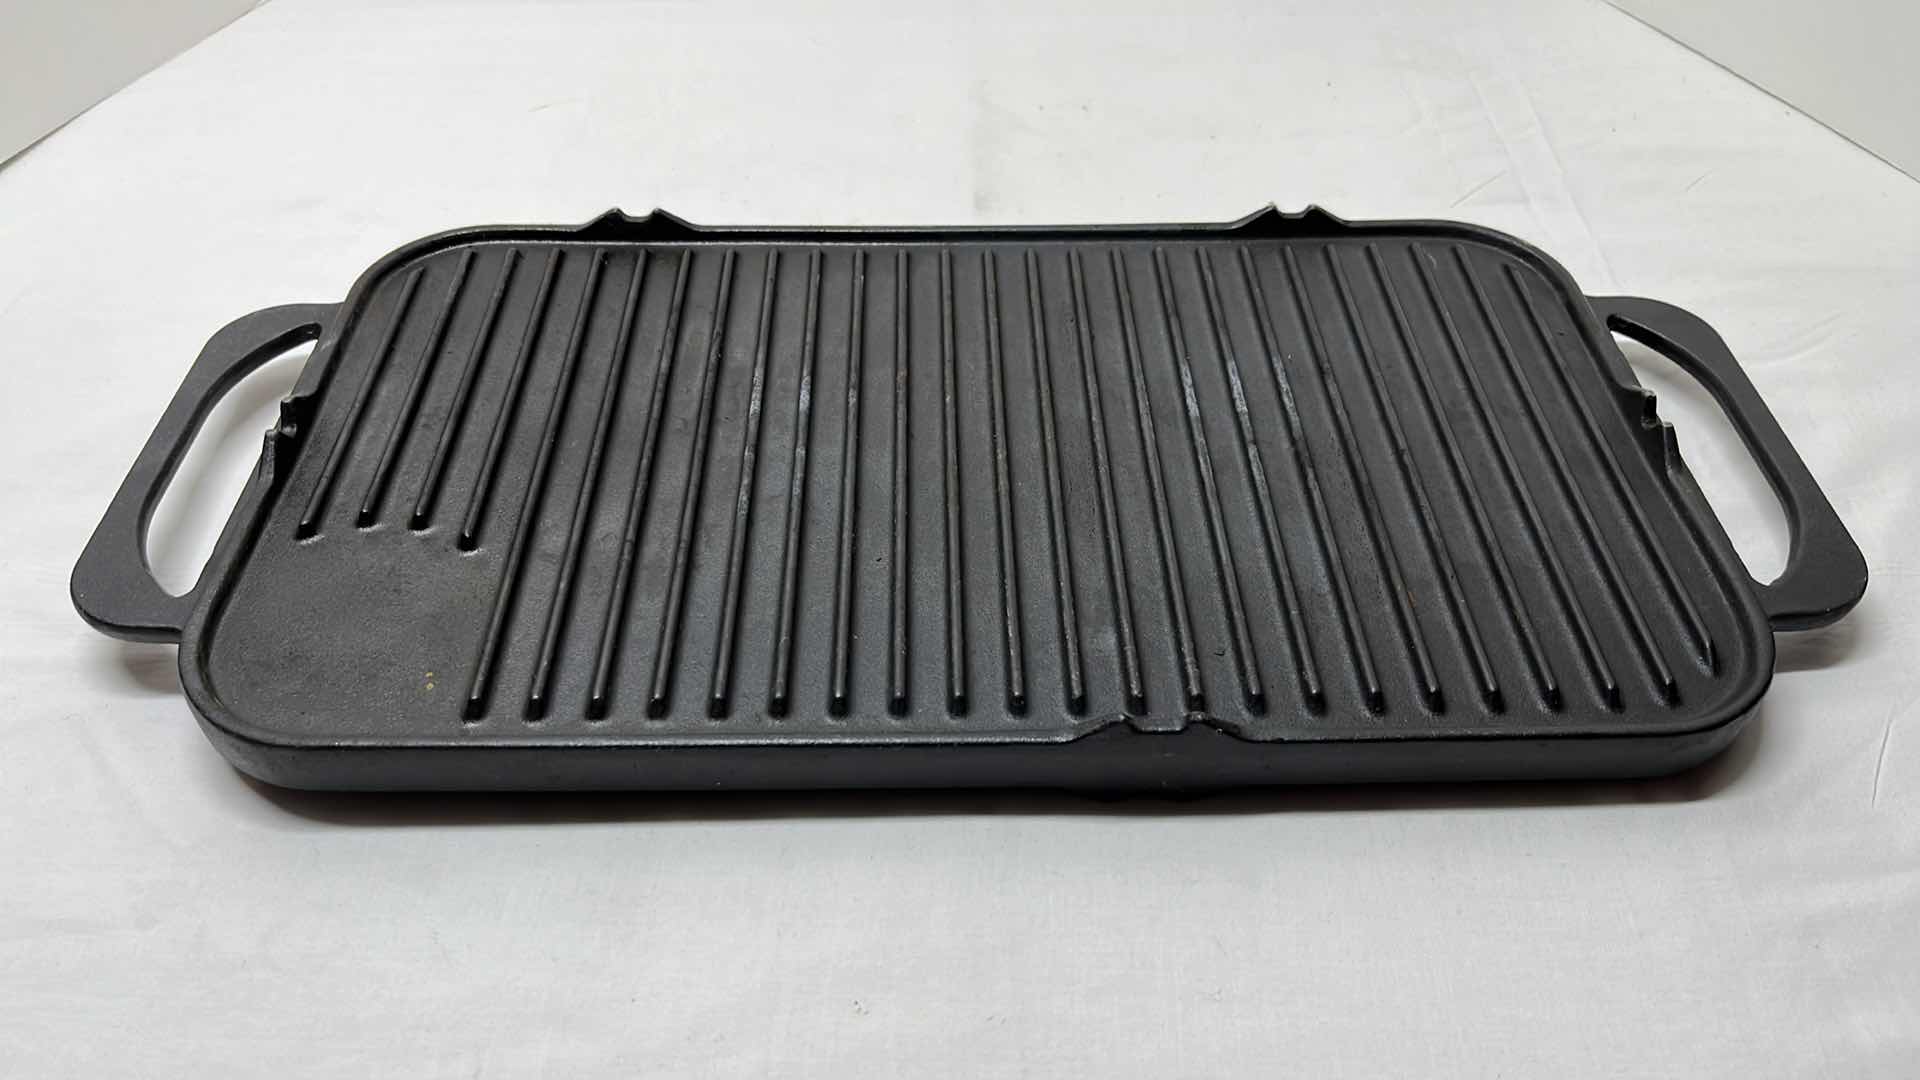 Photo 3 of STOVE TOP CAST IRON REVERSIBLE GRIDDLE/GRILL PAN 9” X 16”